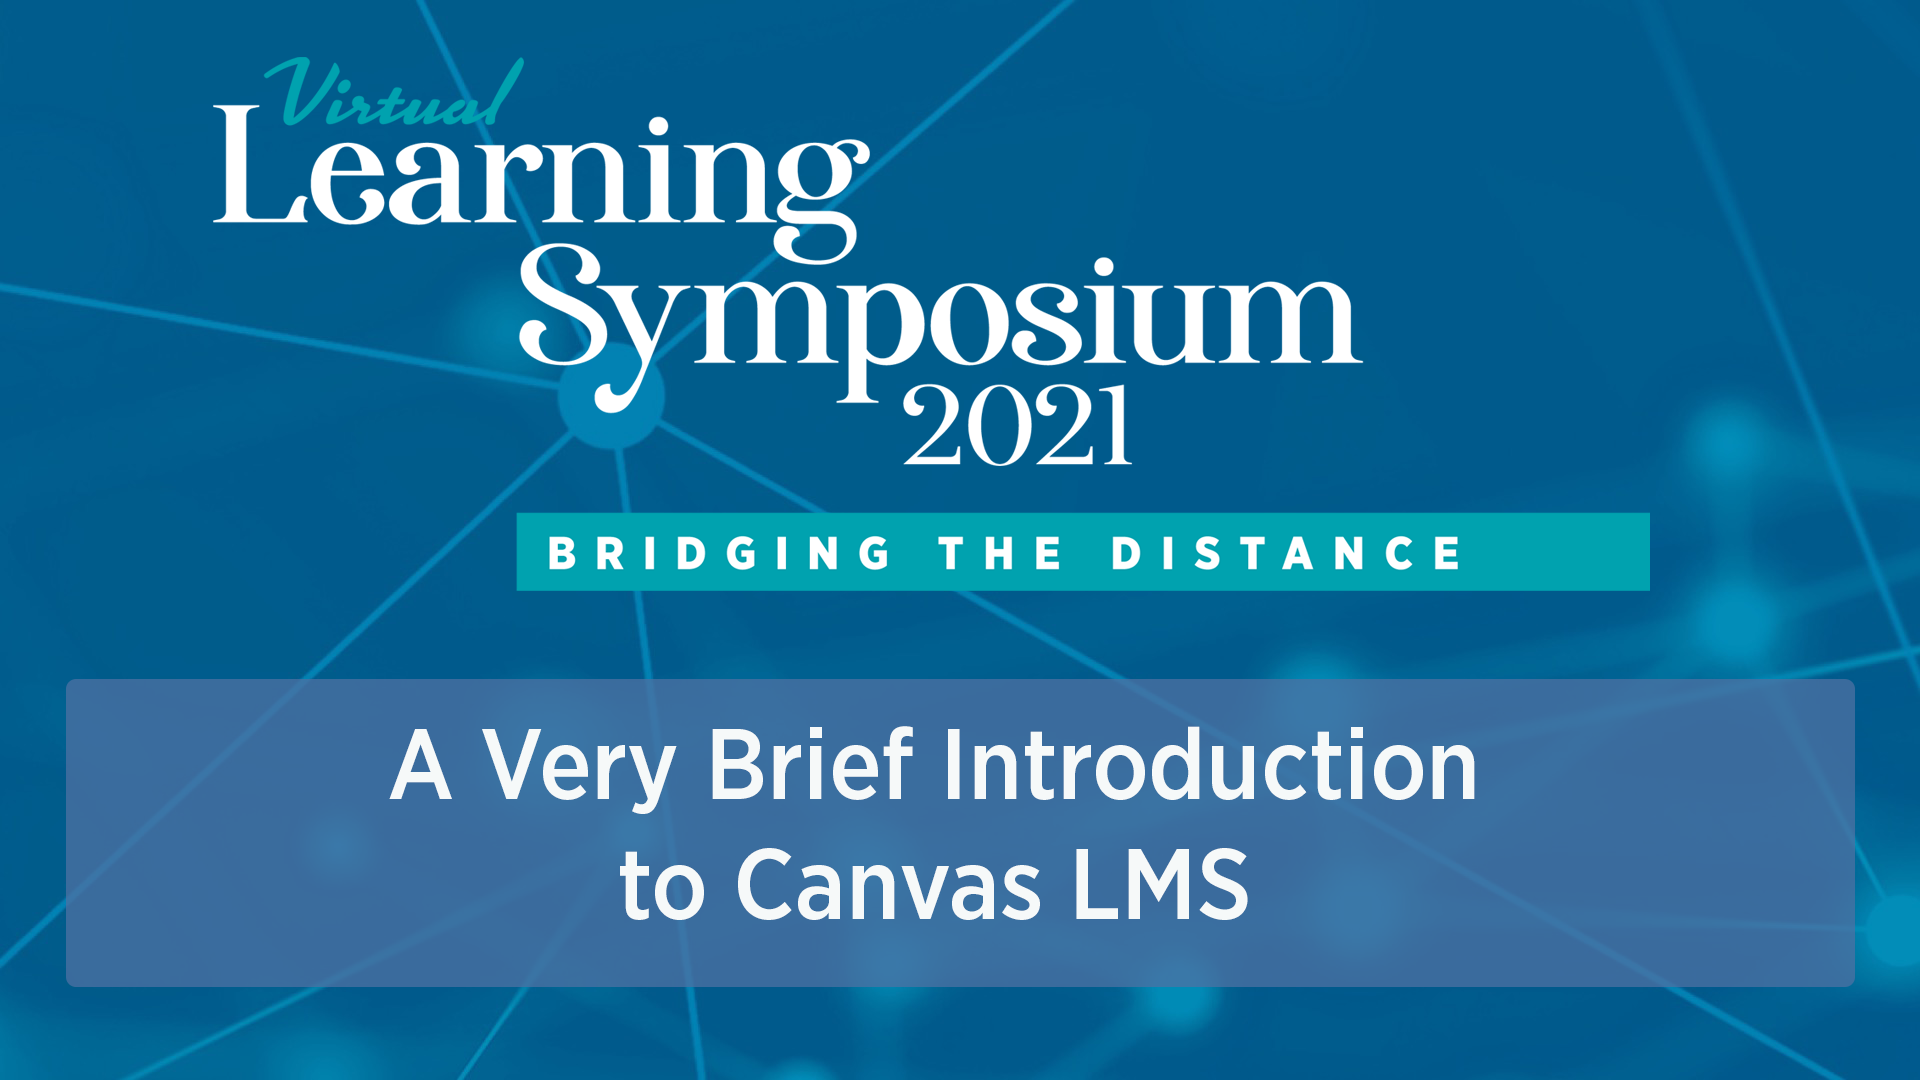 A Very Brief Introduction to Canvas LMS